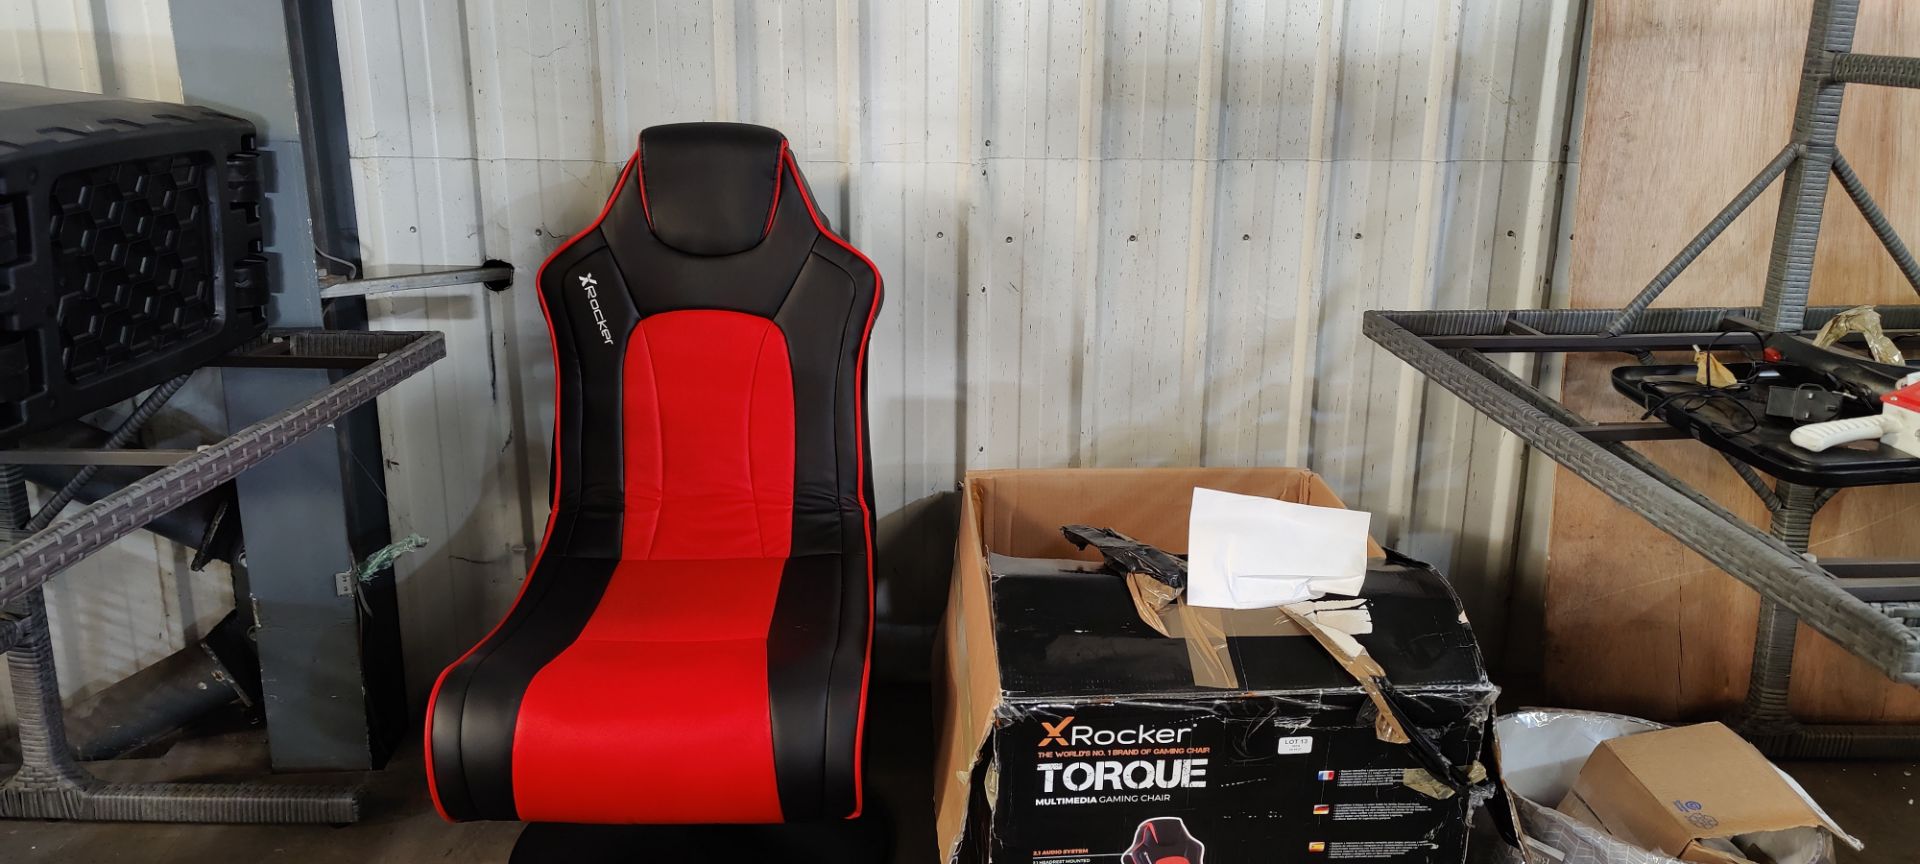 (P2) X-Rocker Torque Multimedia Gaming Chair RRP £259.99. Unit Appears Complete, Box Damaged. Item - Image 3 of 6